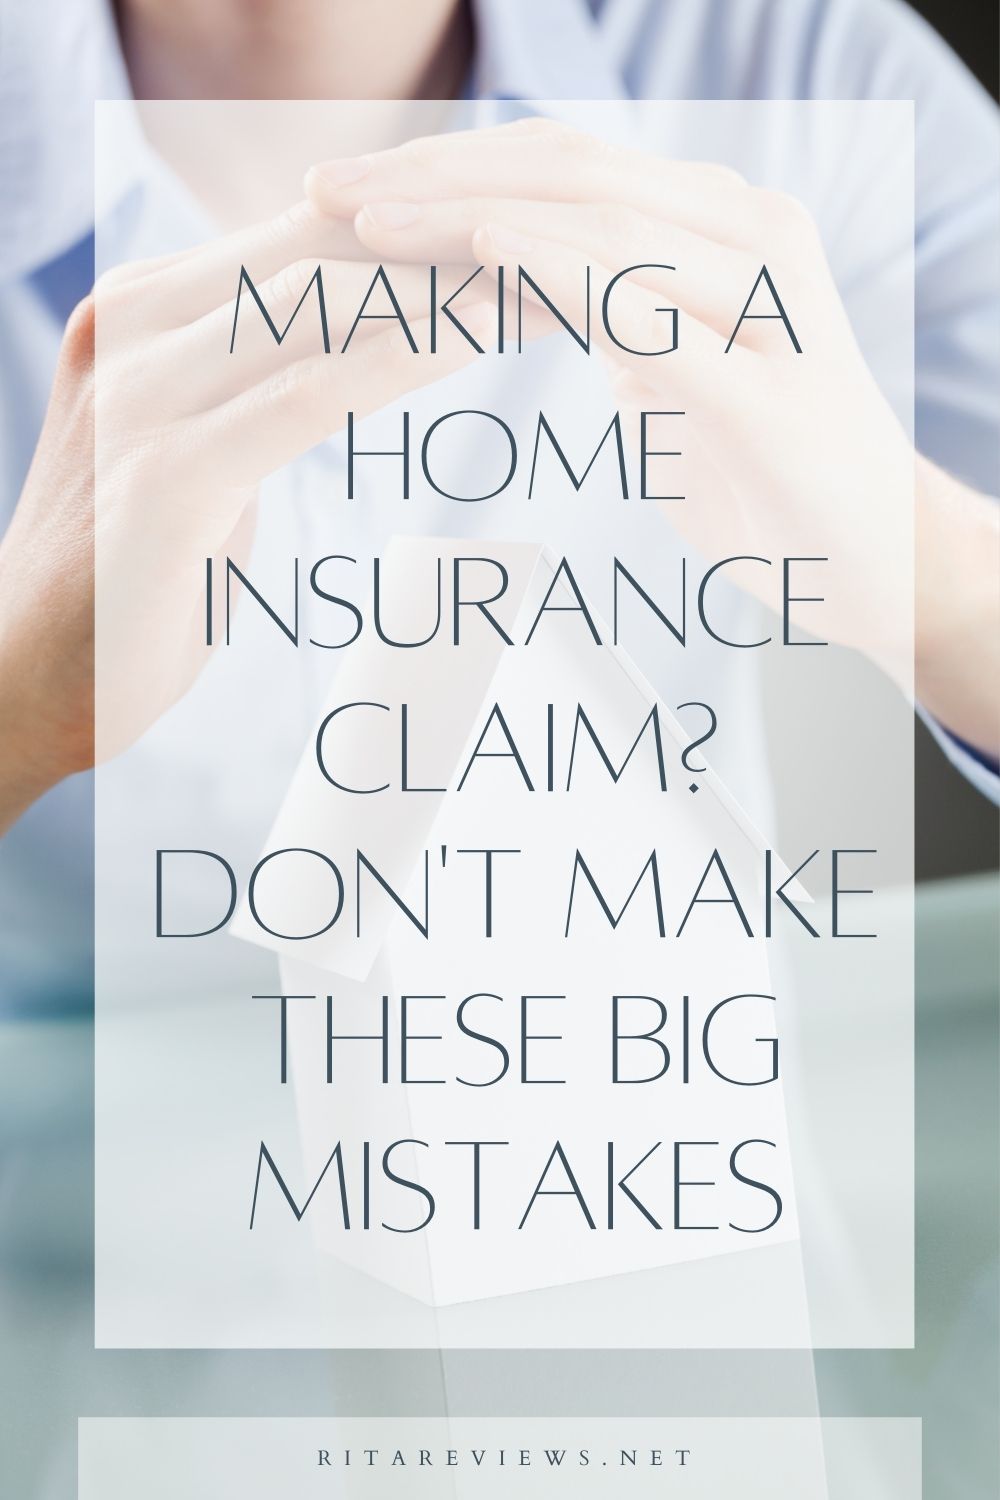 Making A Home Insurance Claim Don't Make These Big Mistakes